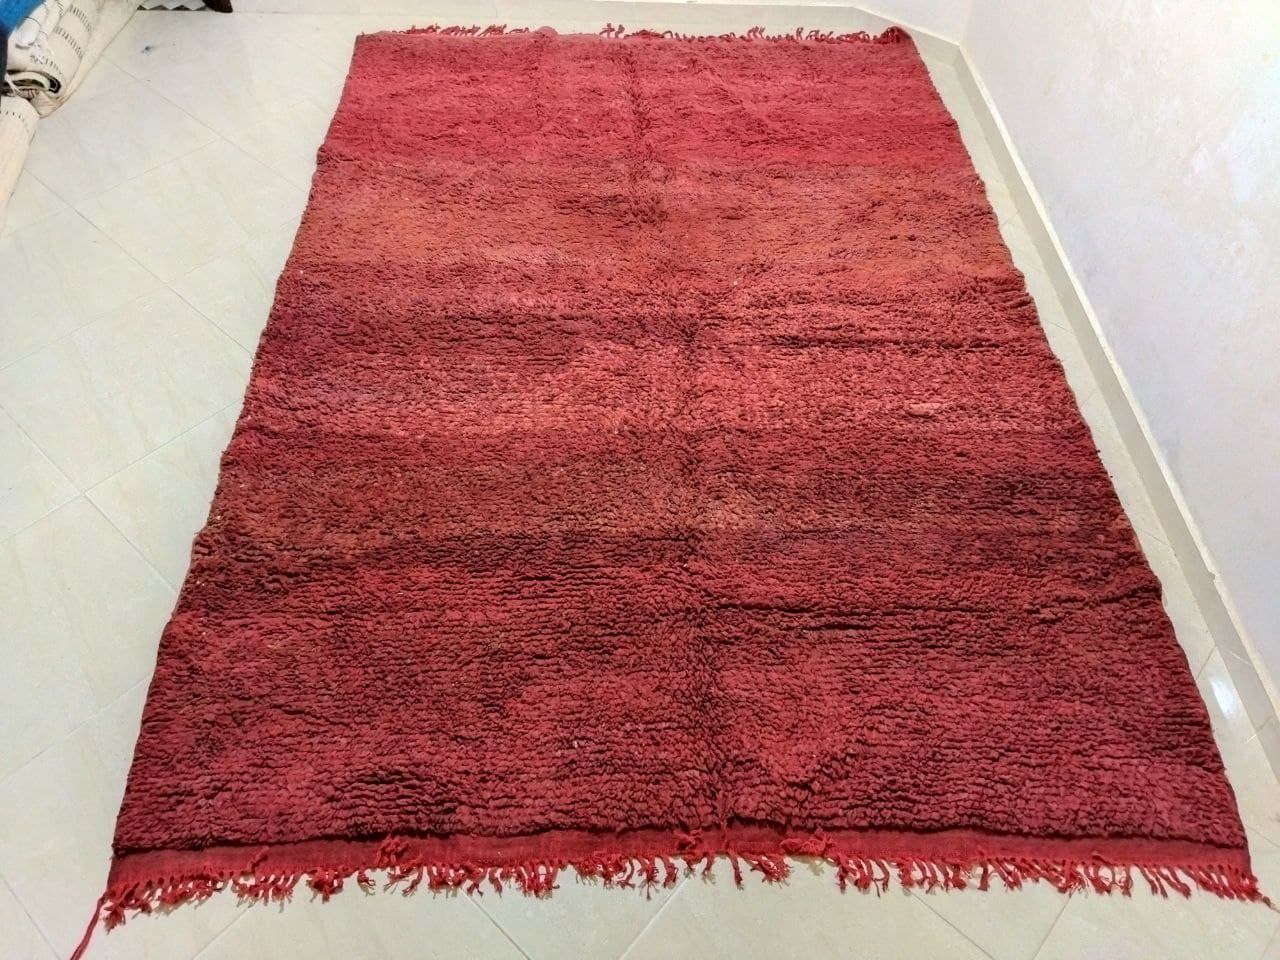 Moroccan rug Style Red Azilal rug 6x10 ft Handmade rug Berber rugrugsMoroccan Rugs Handmade Beni Ourain Rug - Berber Rug